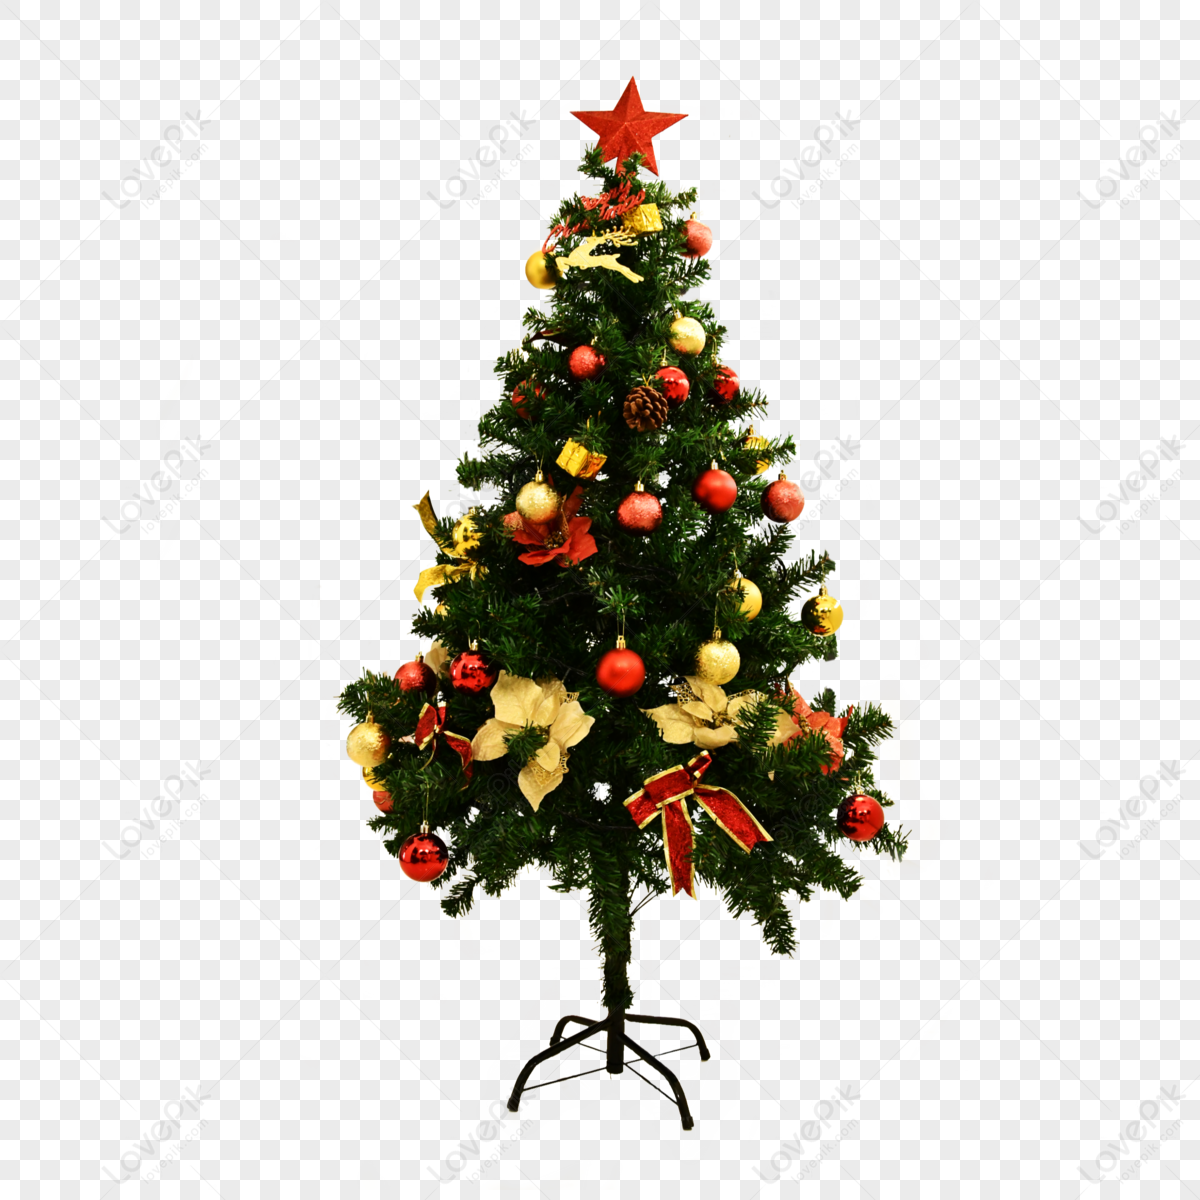 Christmas Stars Decorative Christmas Tree, Red Stars PNG, Hanging PNG ...